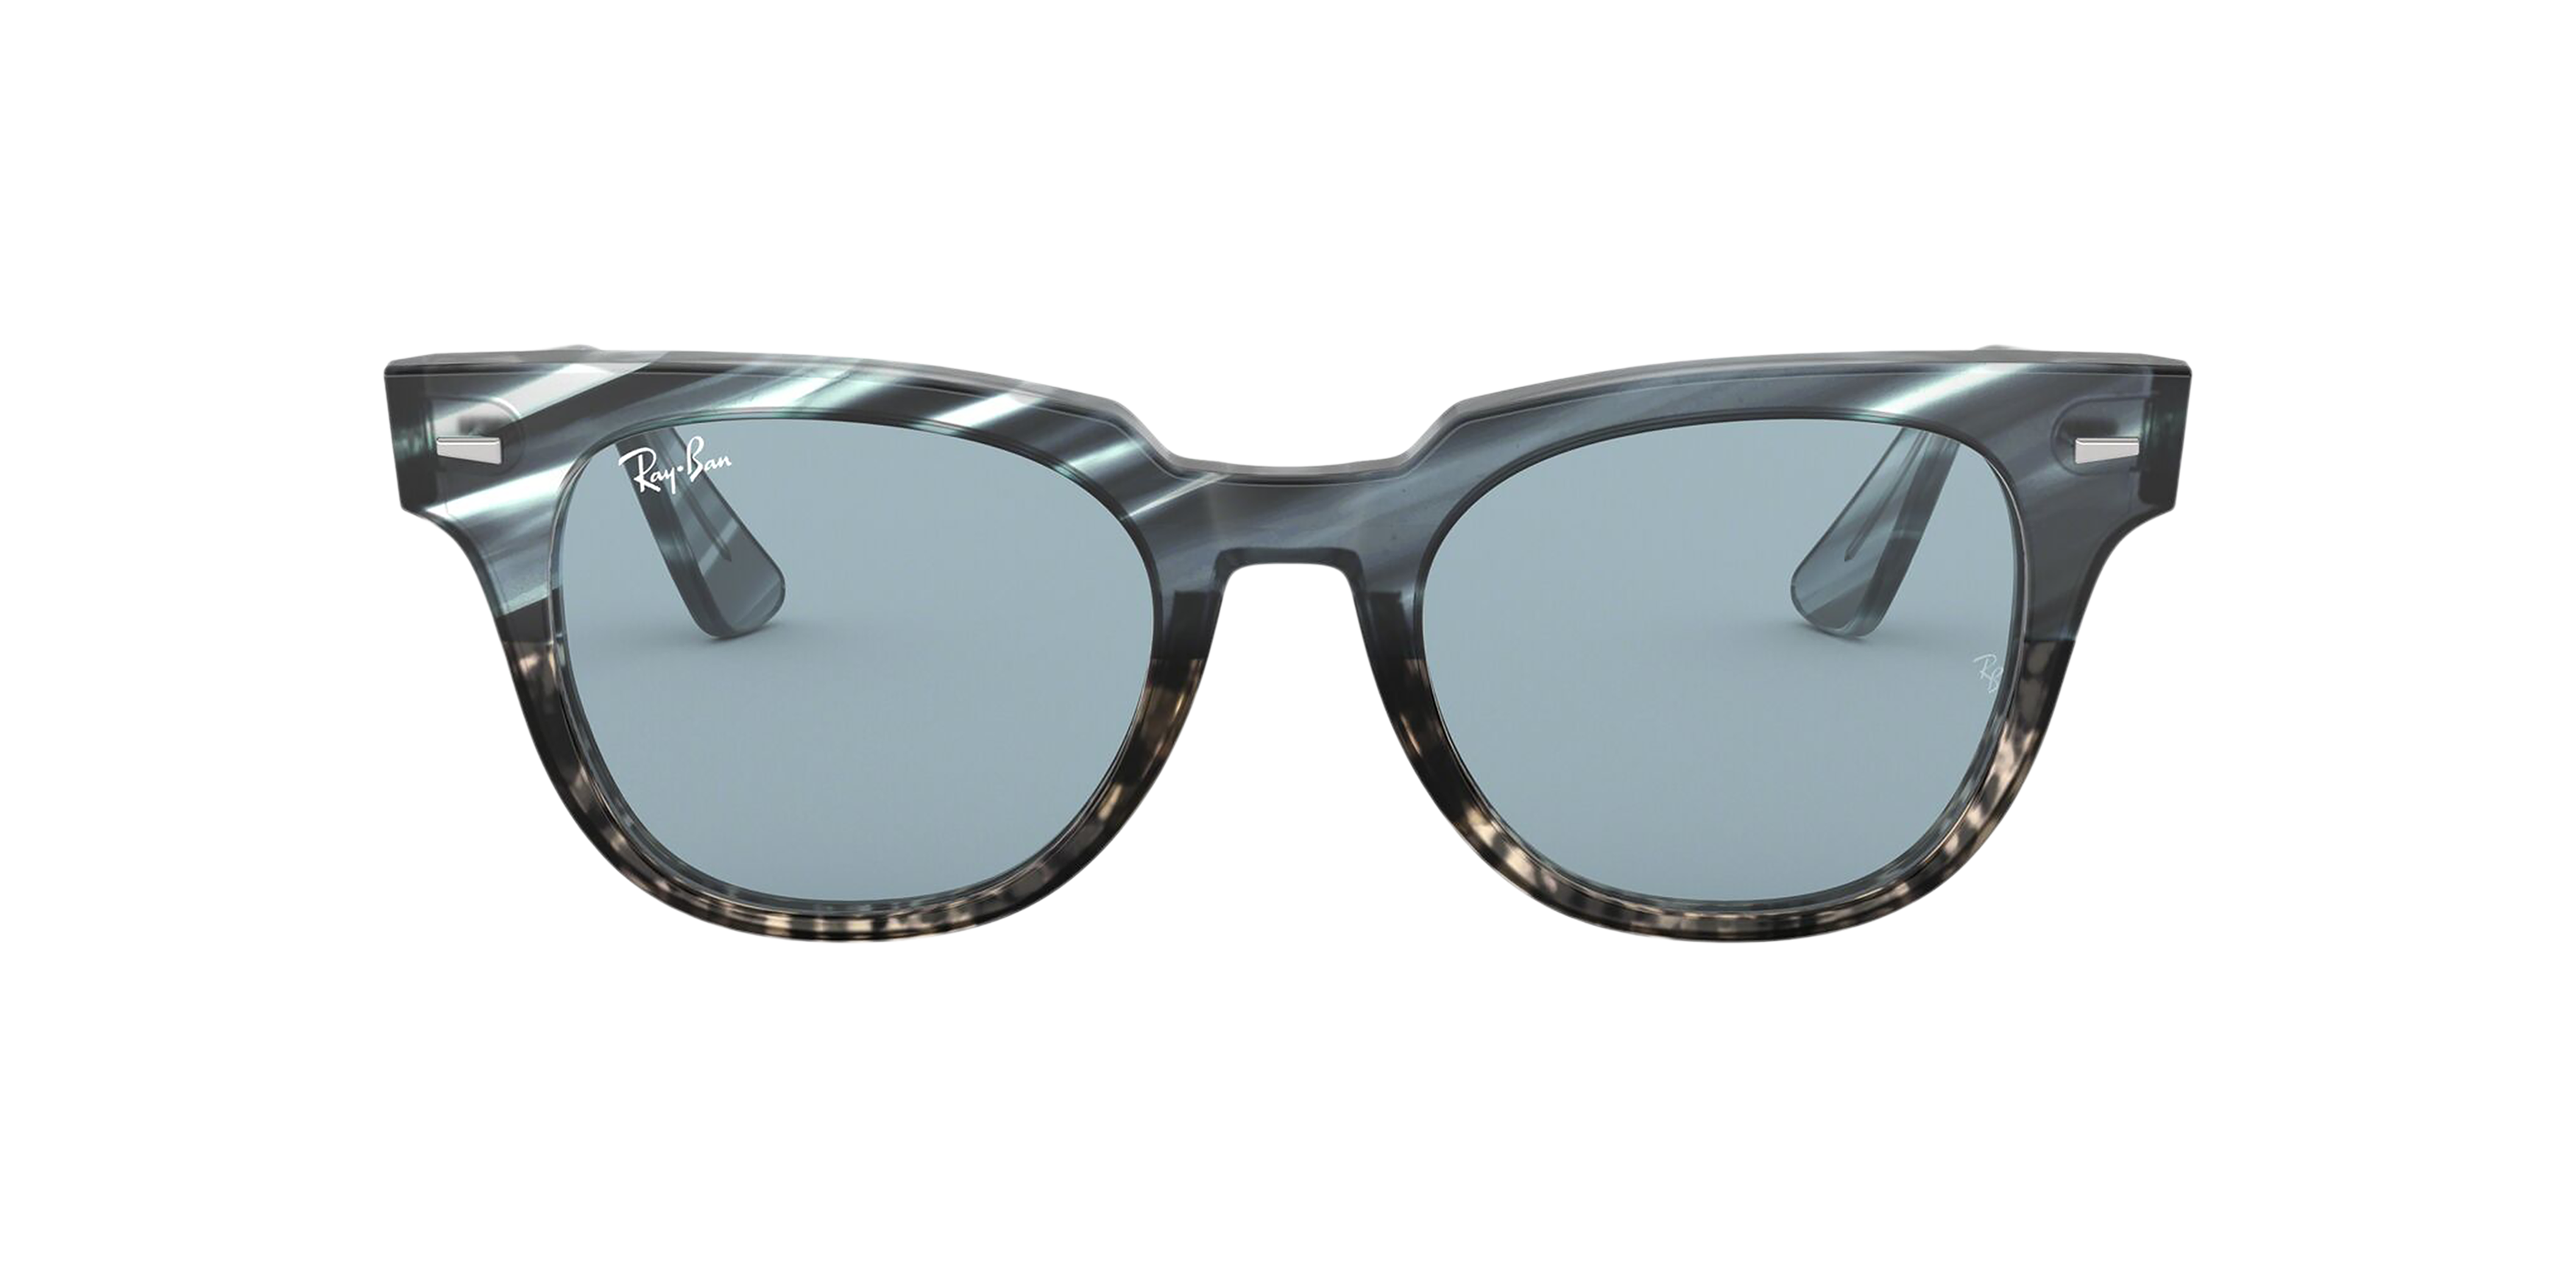 [products.image.front] Ray-Ban Meteor Striped Havana RB2168 125262